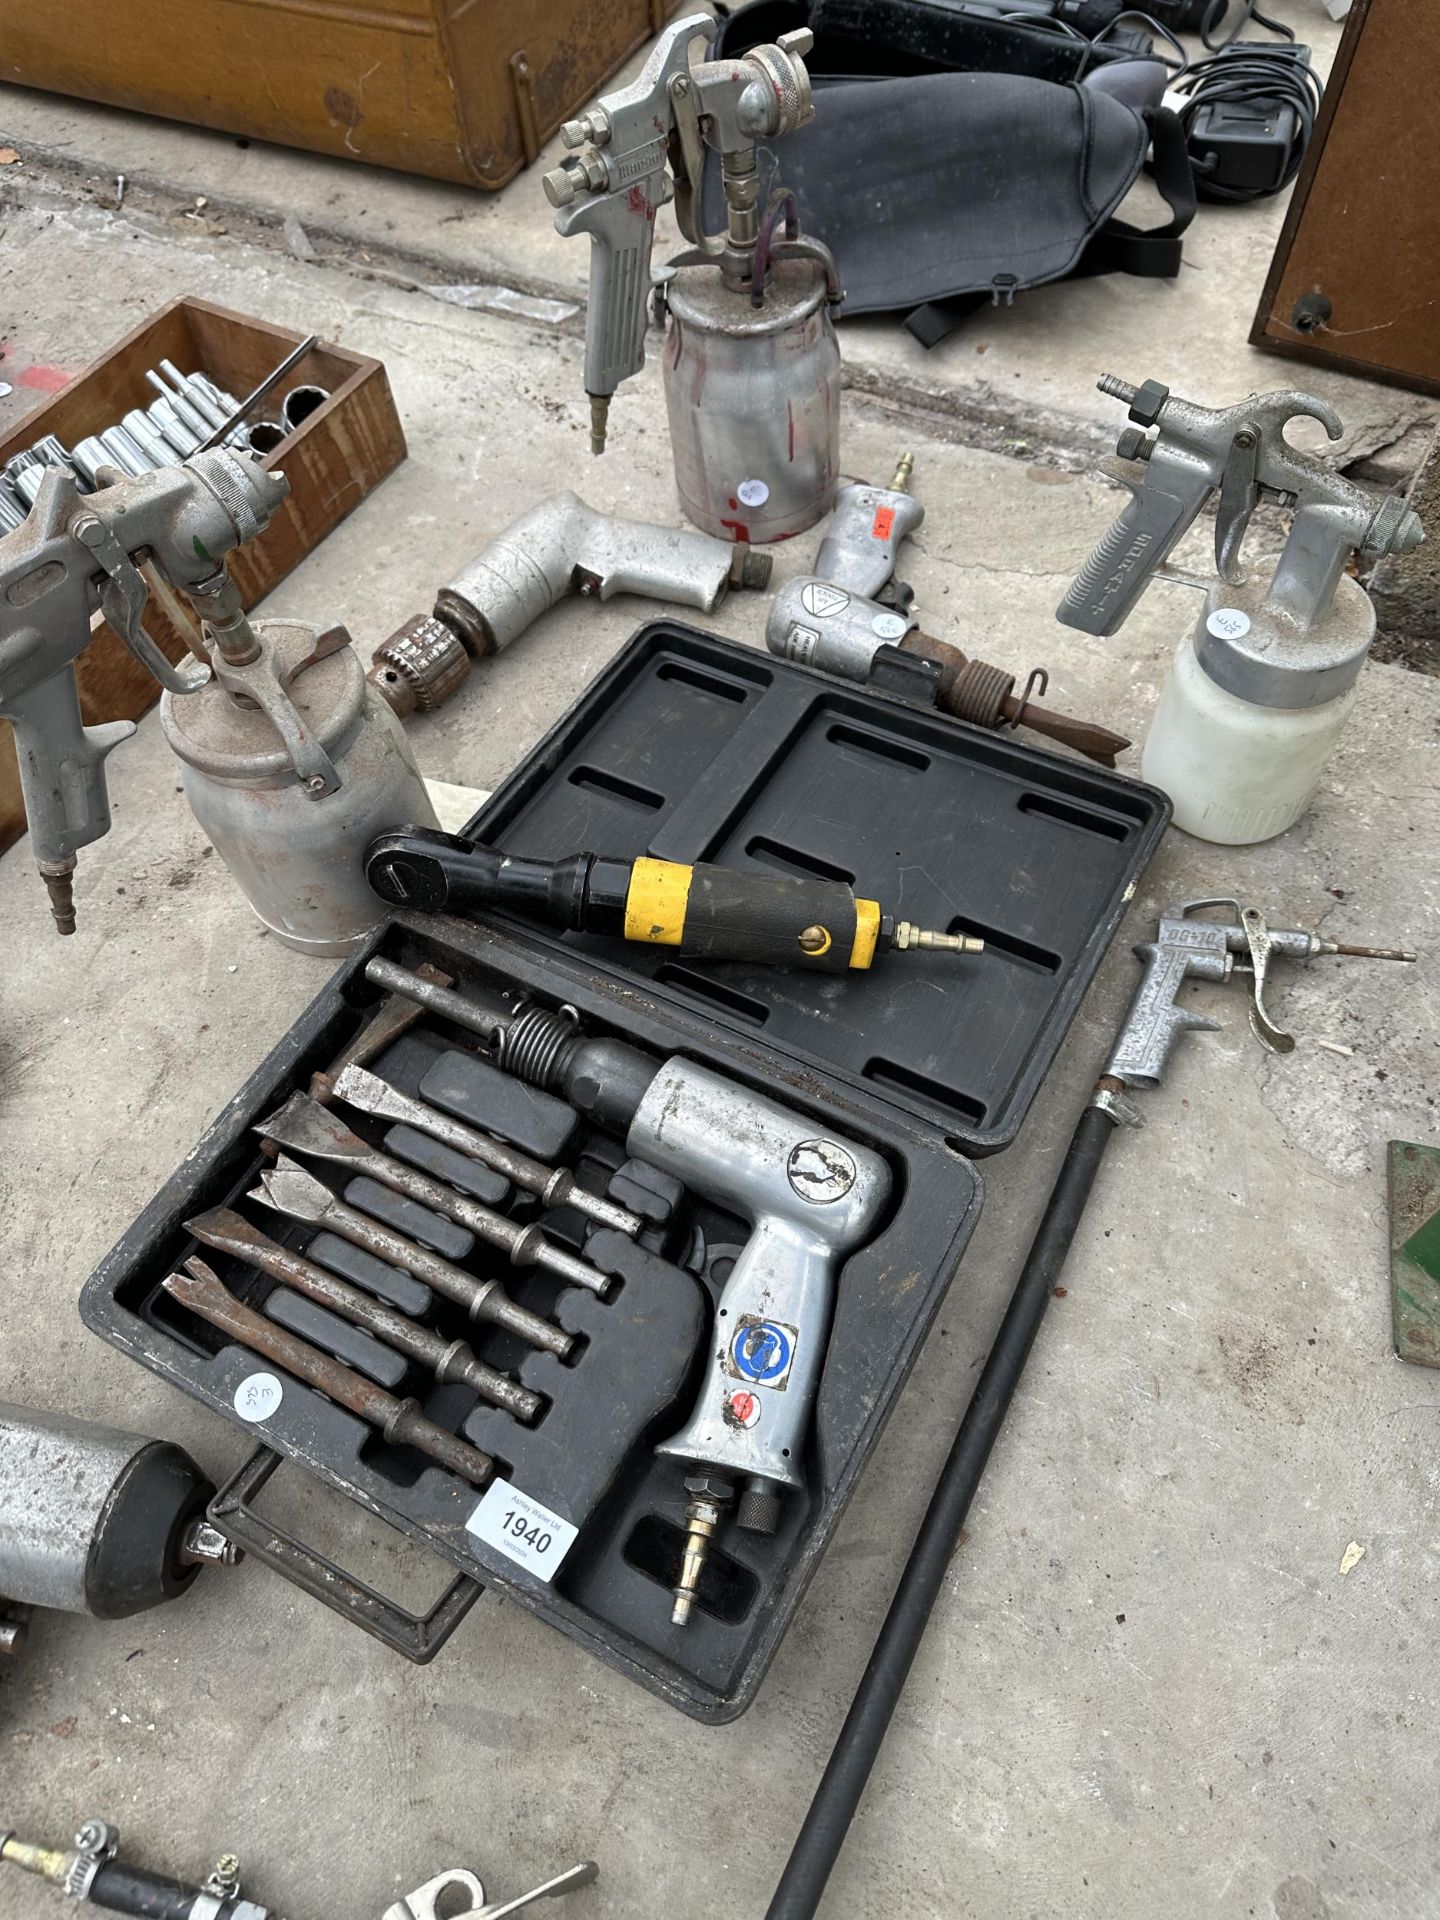 A LARGE COLLECTION OF COMPRESSOR ATTATCHMENTS TO INCLUDE A CHISEL GUN, PAINT SPRAYERS AND A DRILL - Image 2 of 3